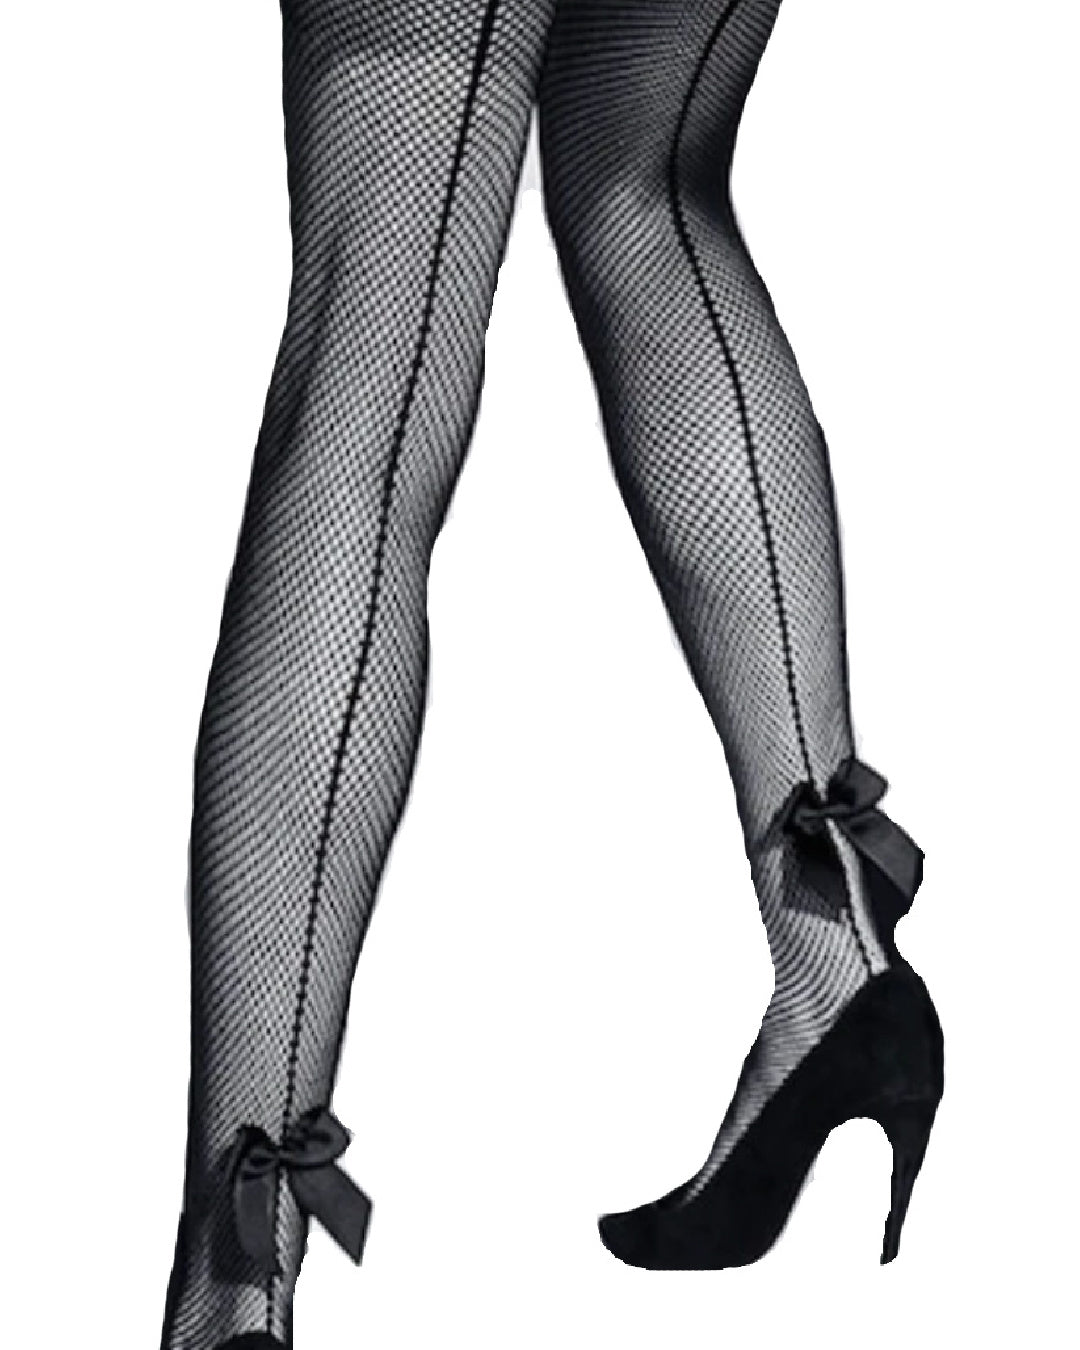 Elvgren- the 1940s Style Fishnet Pantyhose with Ankle Bows and